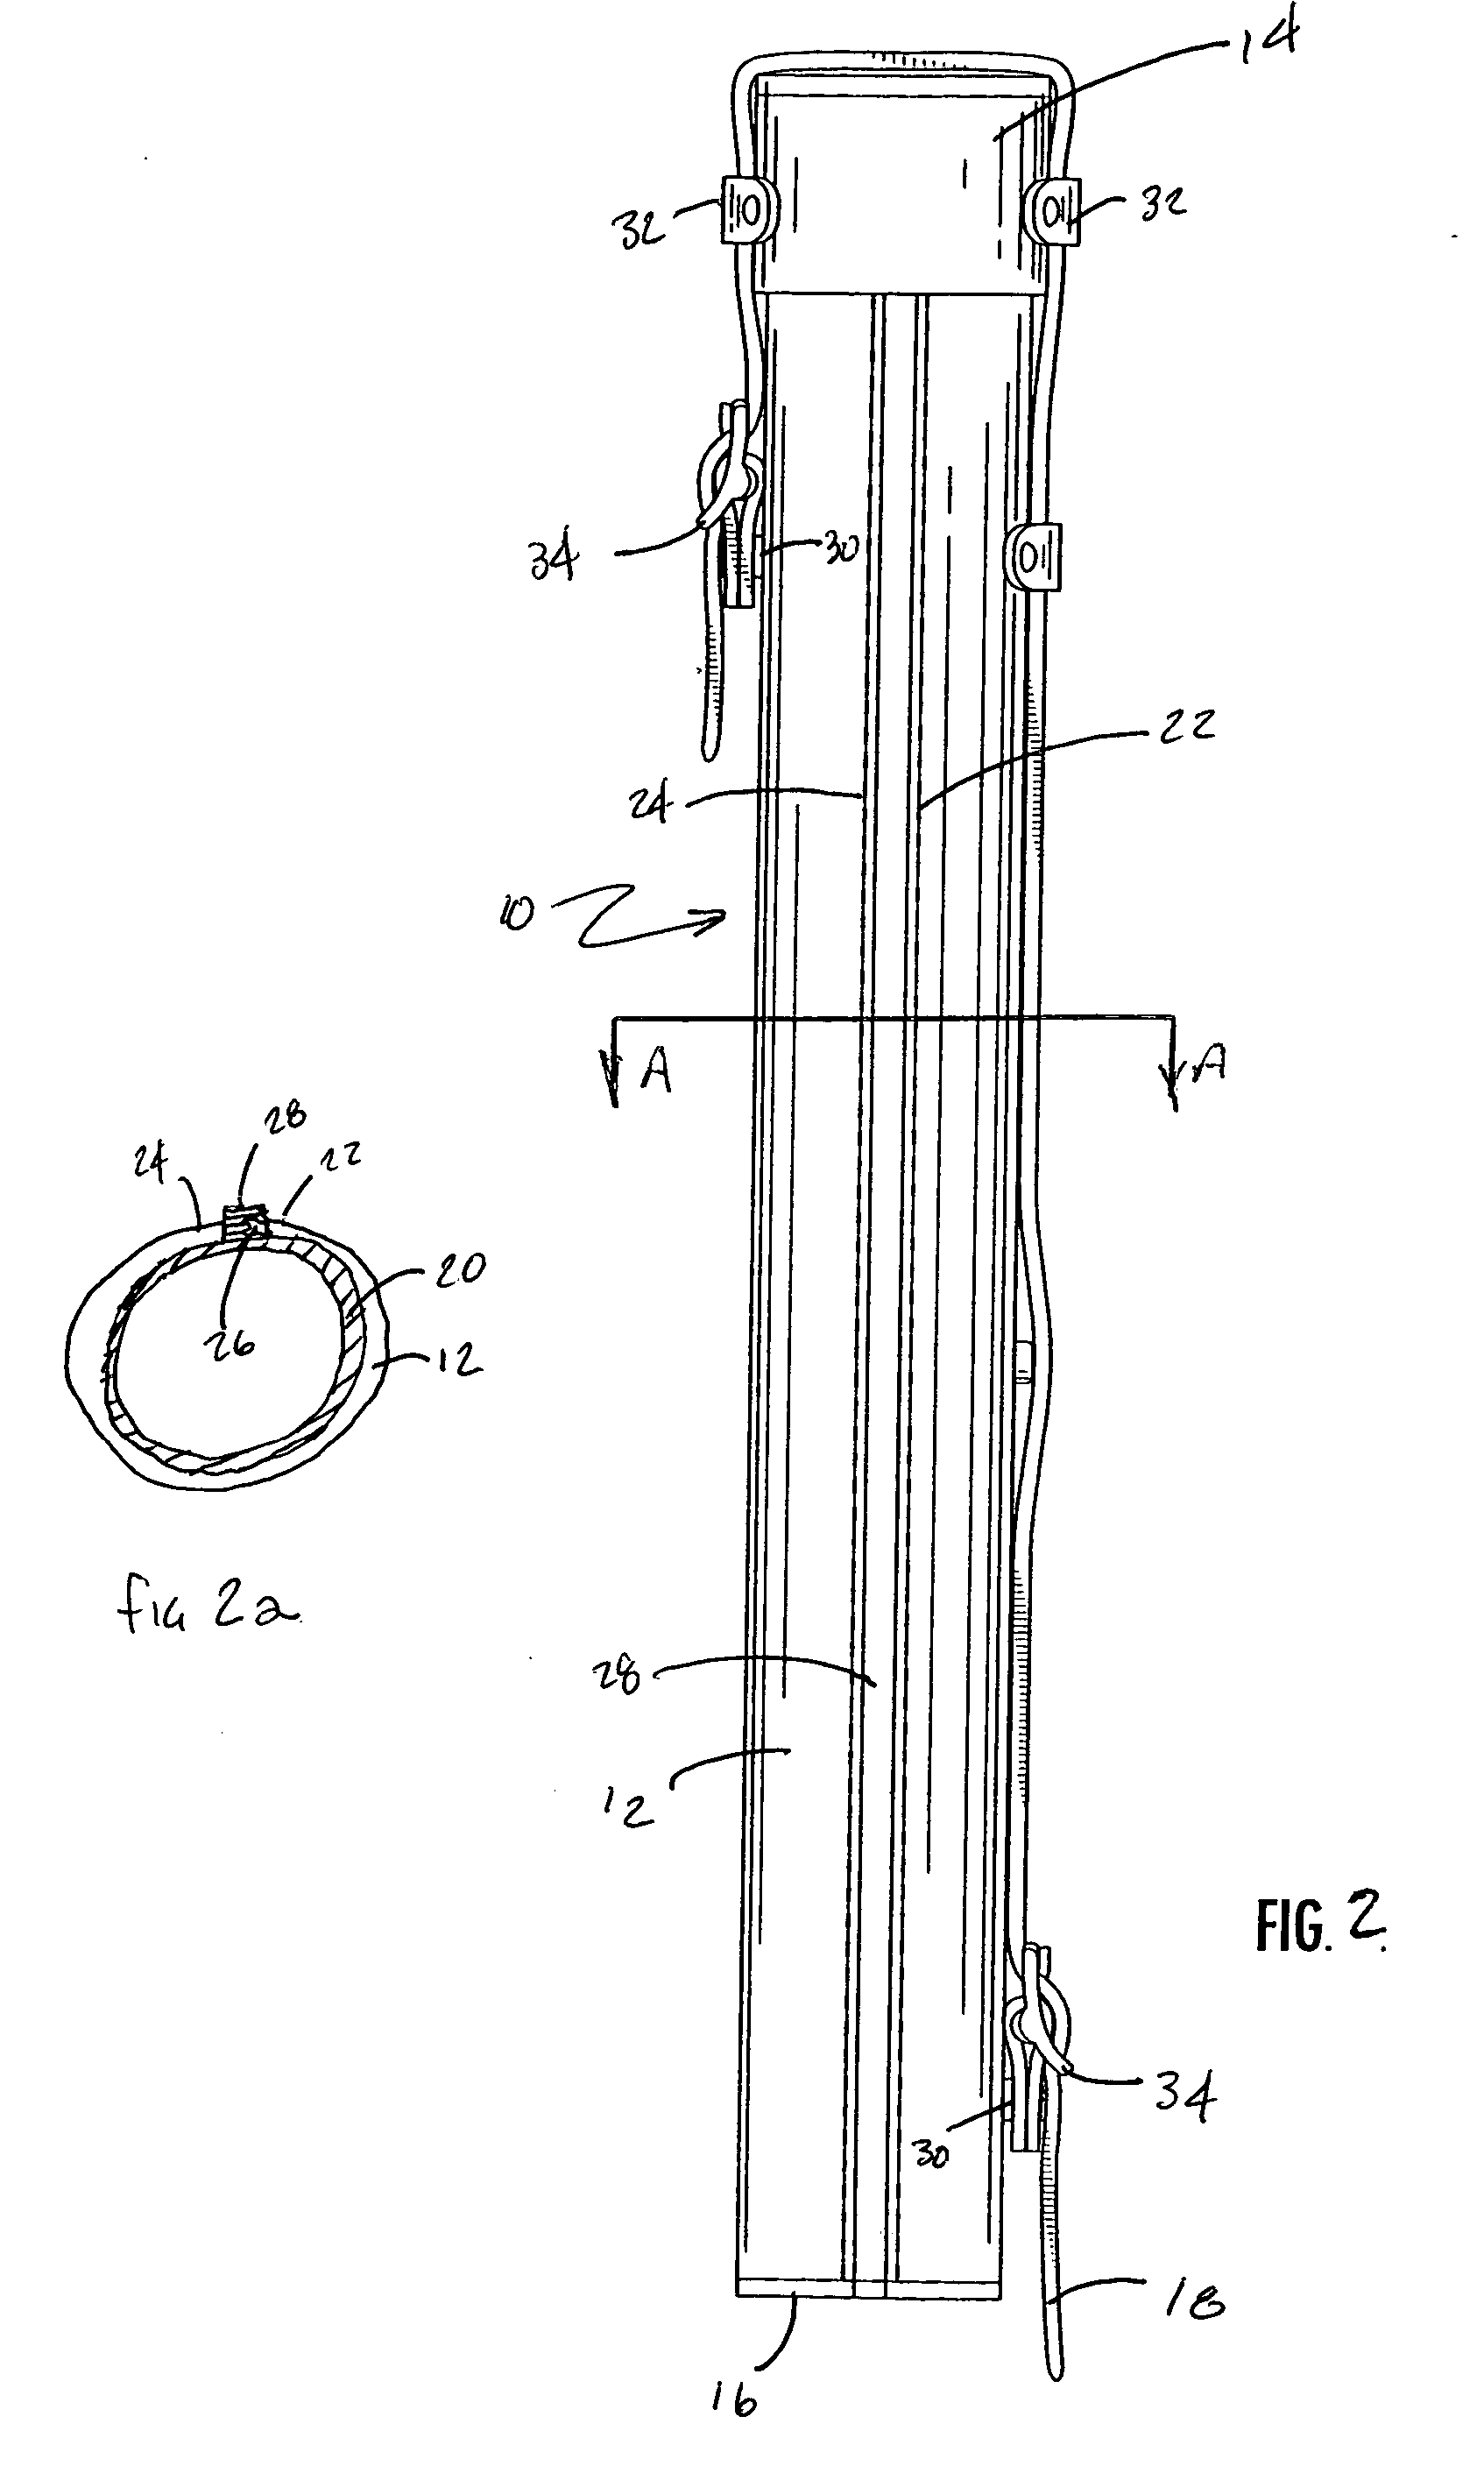 Method of manufacturing a tubular storage assembly